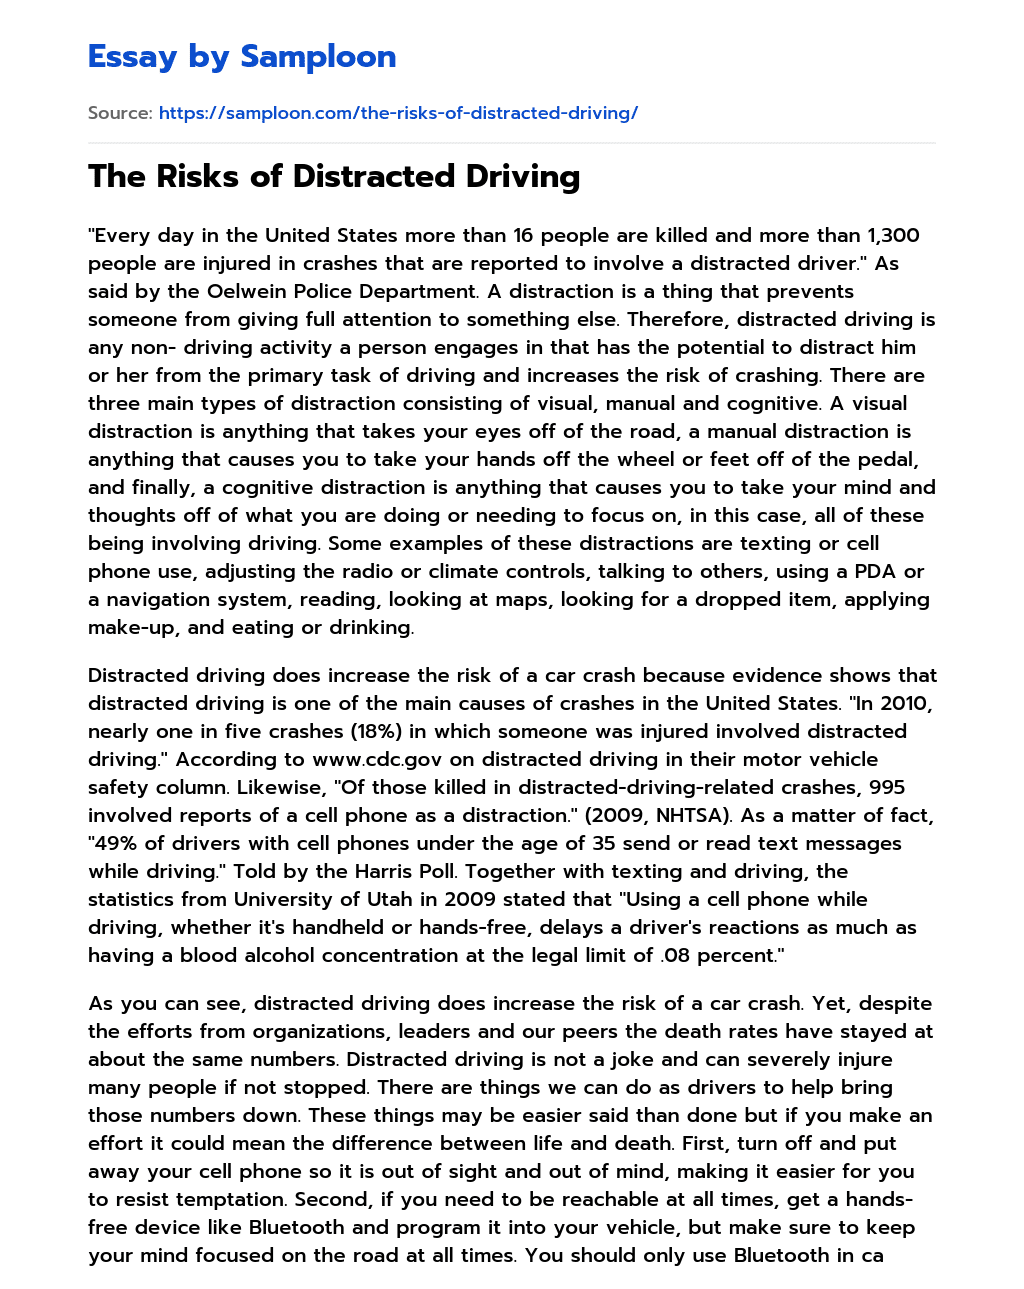 The Risks of Distracted Driving essay